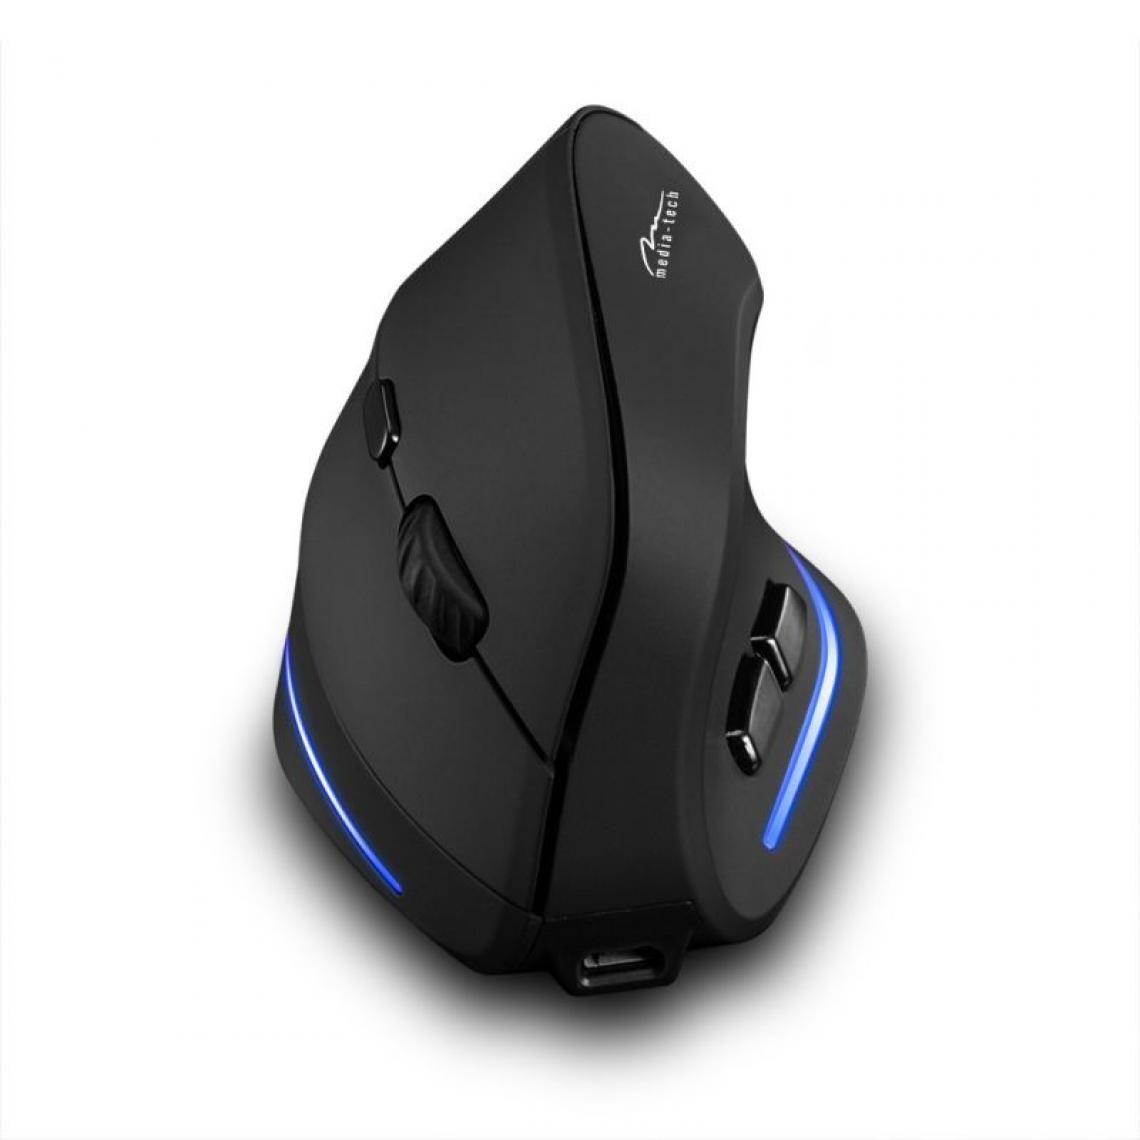 Inconnu - Vertic mouse optic wireless MT1123 - Souris